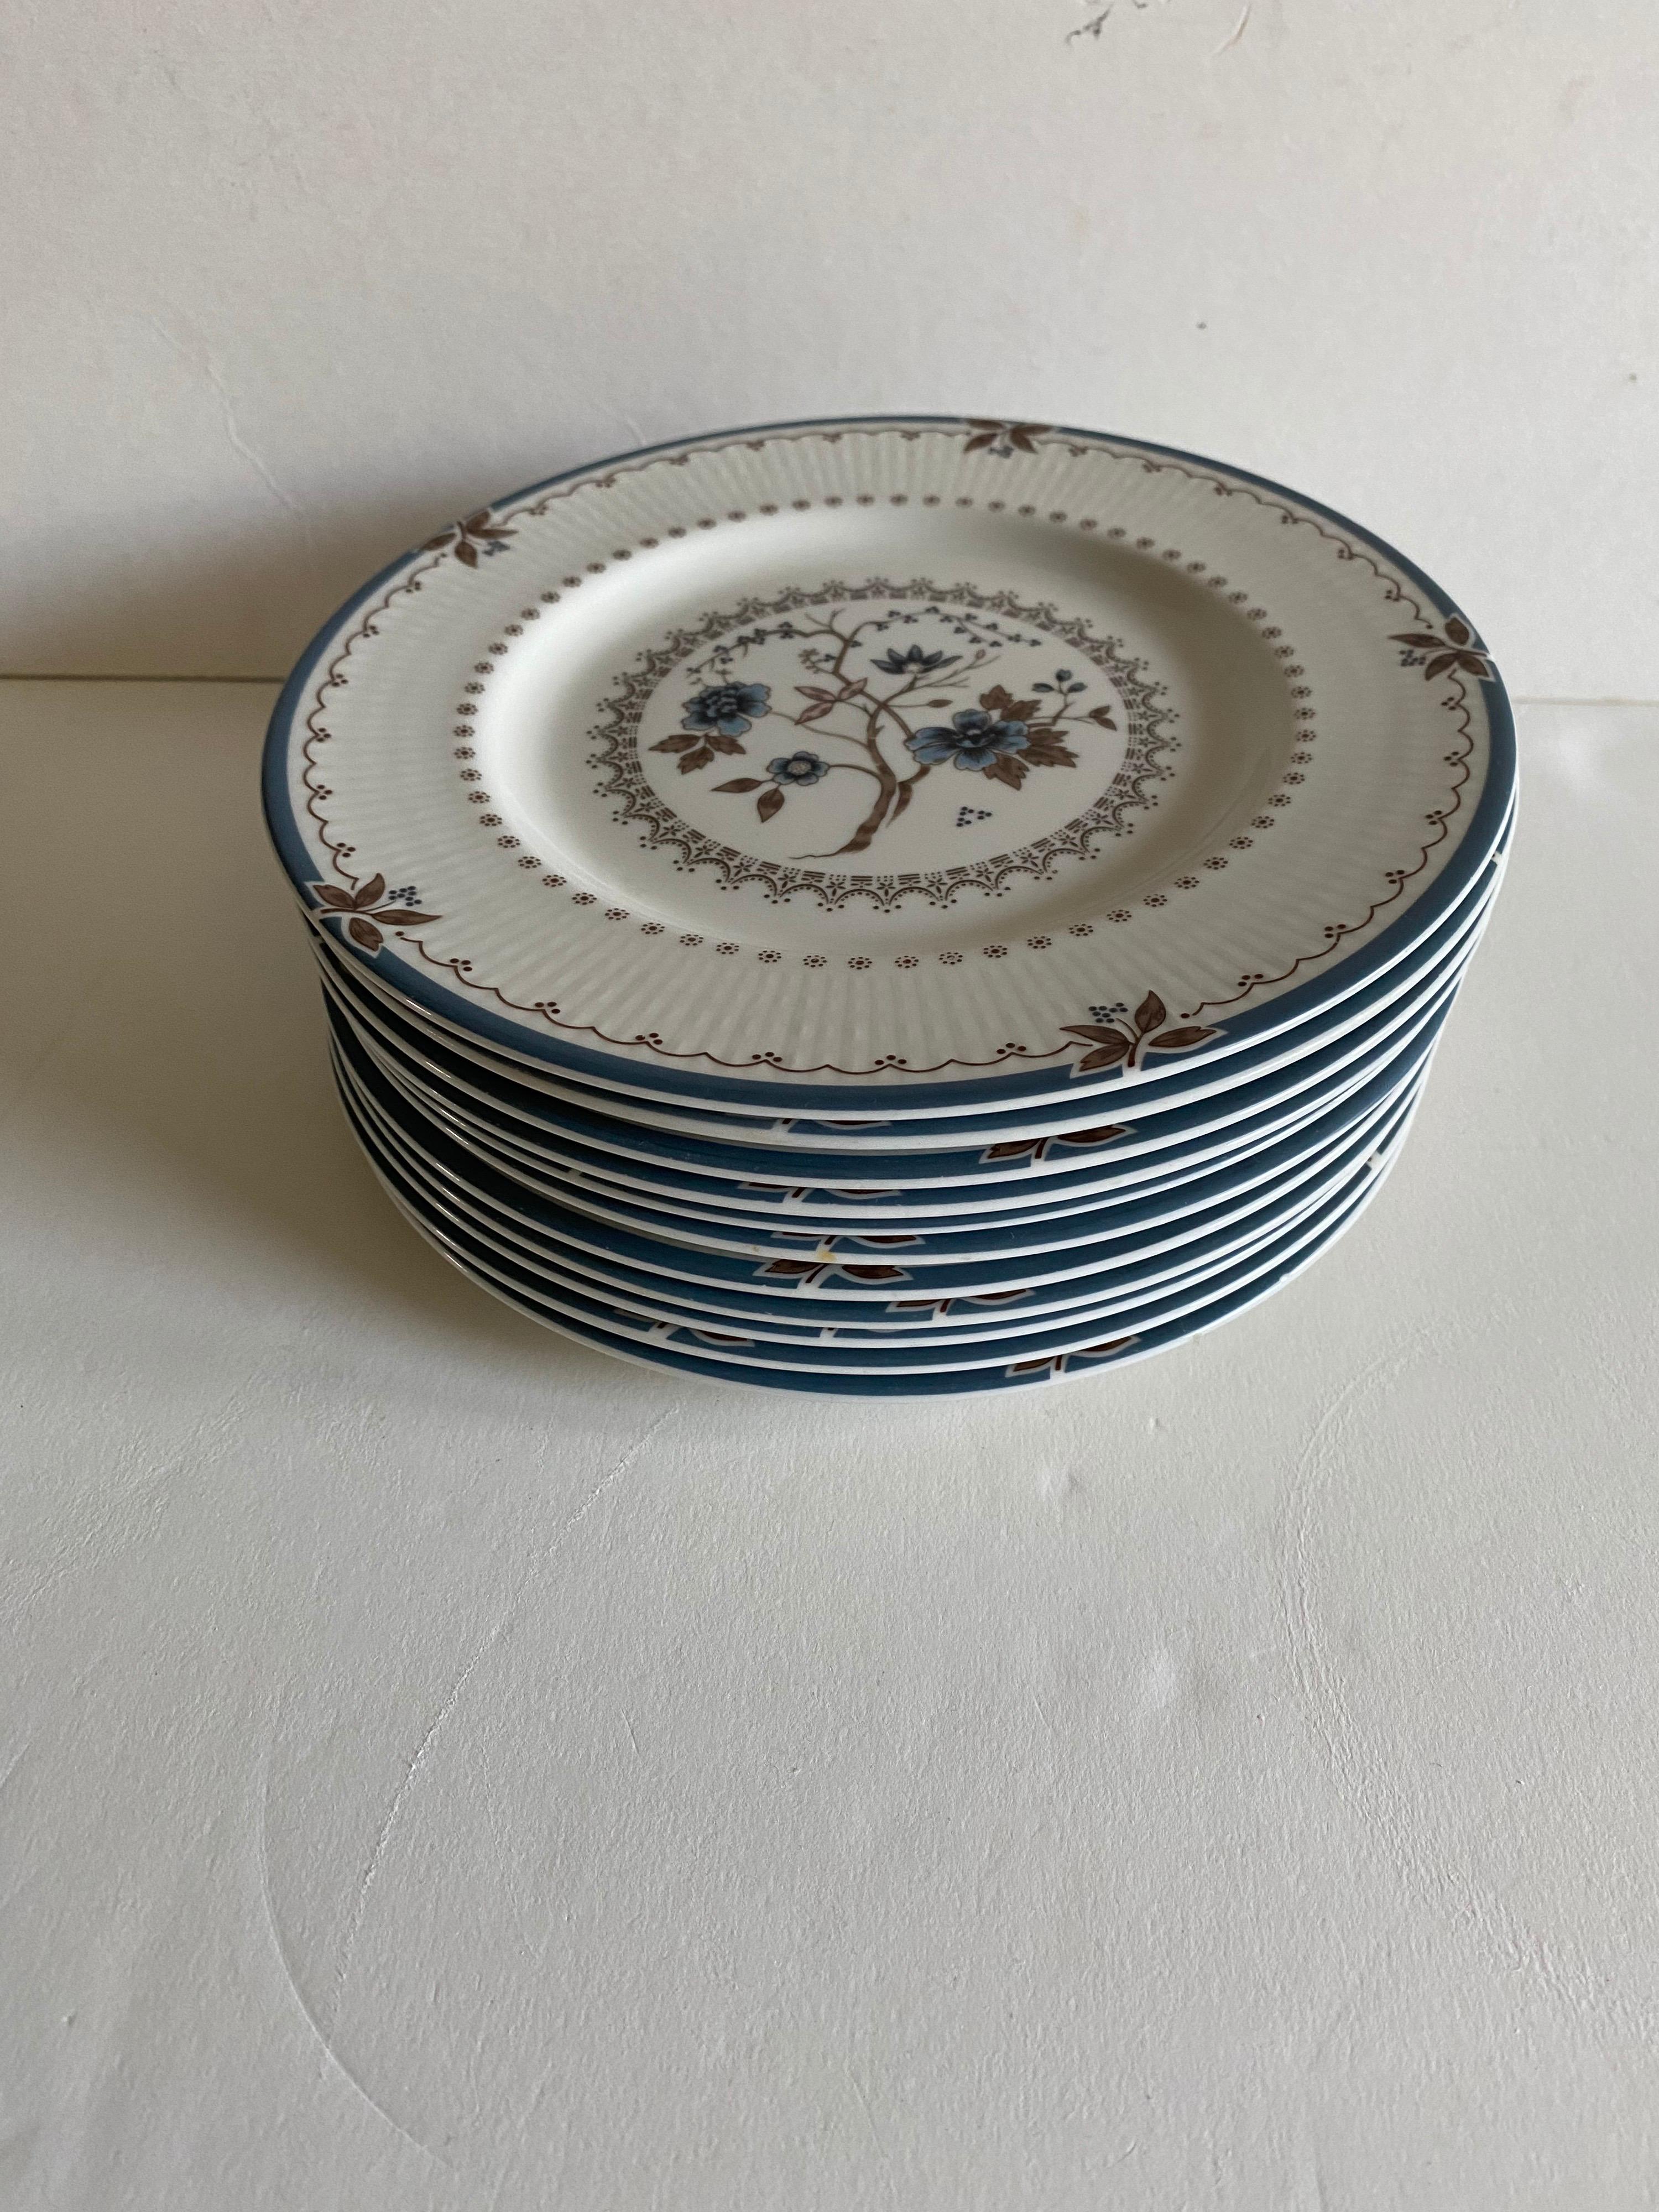 A set of 12 salad and bread plates by Royal Doulton in the Old Colony pattern.

Includes 6 salad plates and 6 bread plates.

Size: Salad plates, 8 inches wide; bread plates 6-1/8 inches wide.


